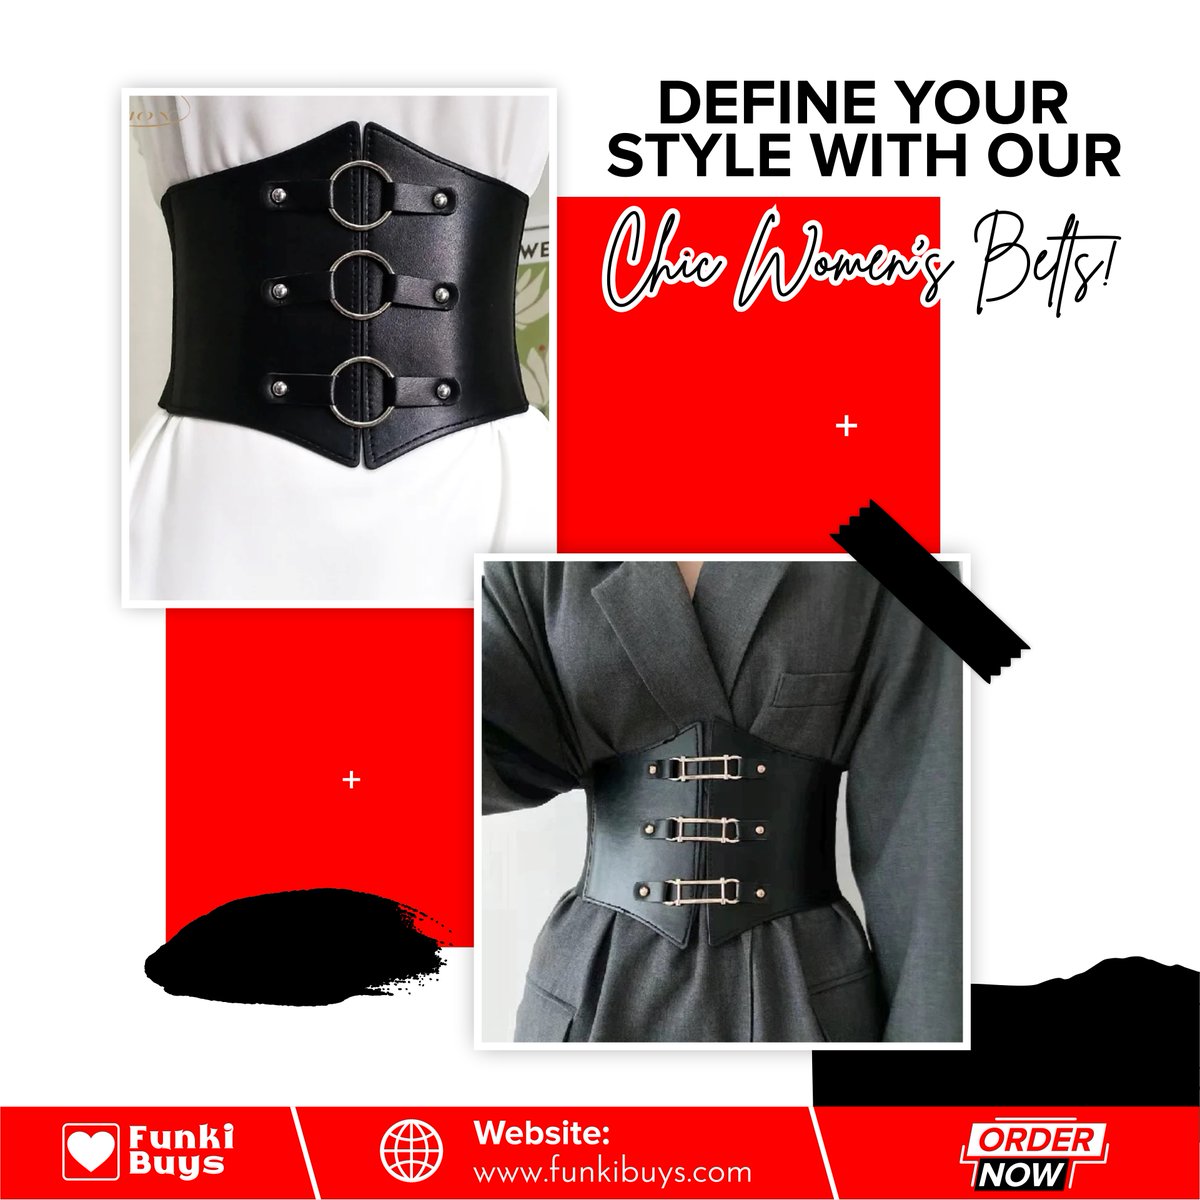 These lace-up wide elastic corset belts are the perfect accessory for any women's wardrobe.

🛍️ buff.ly/46p5cnt
.
.
.
#CorsetBelt #FashionAccessory #WomensFashion #ElasticCorset #StylishBelts #PULeather #VersatileAccessory #FashionStatement #TrendyStyle